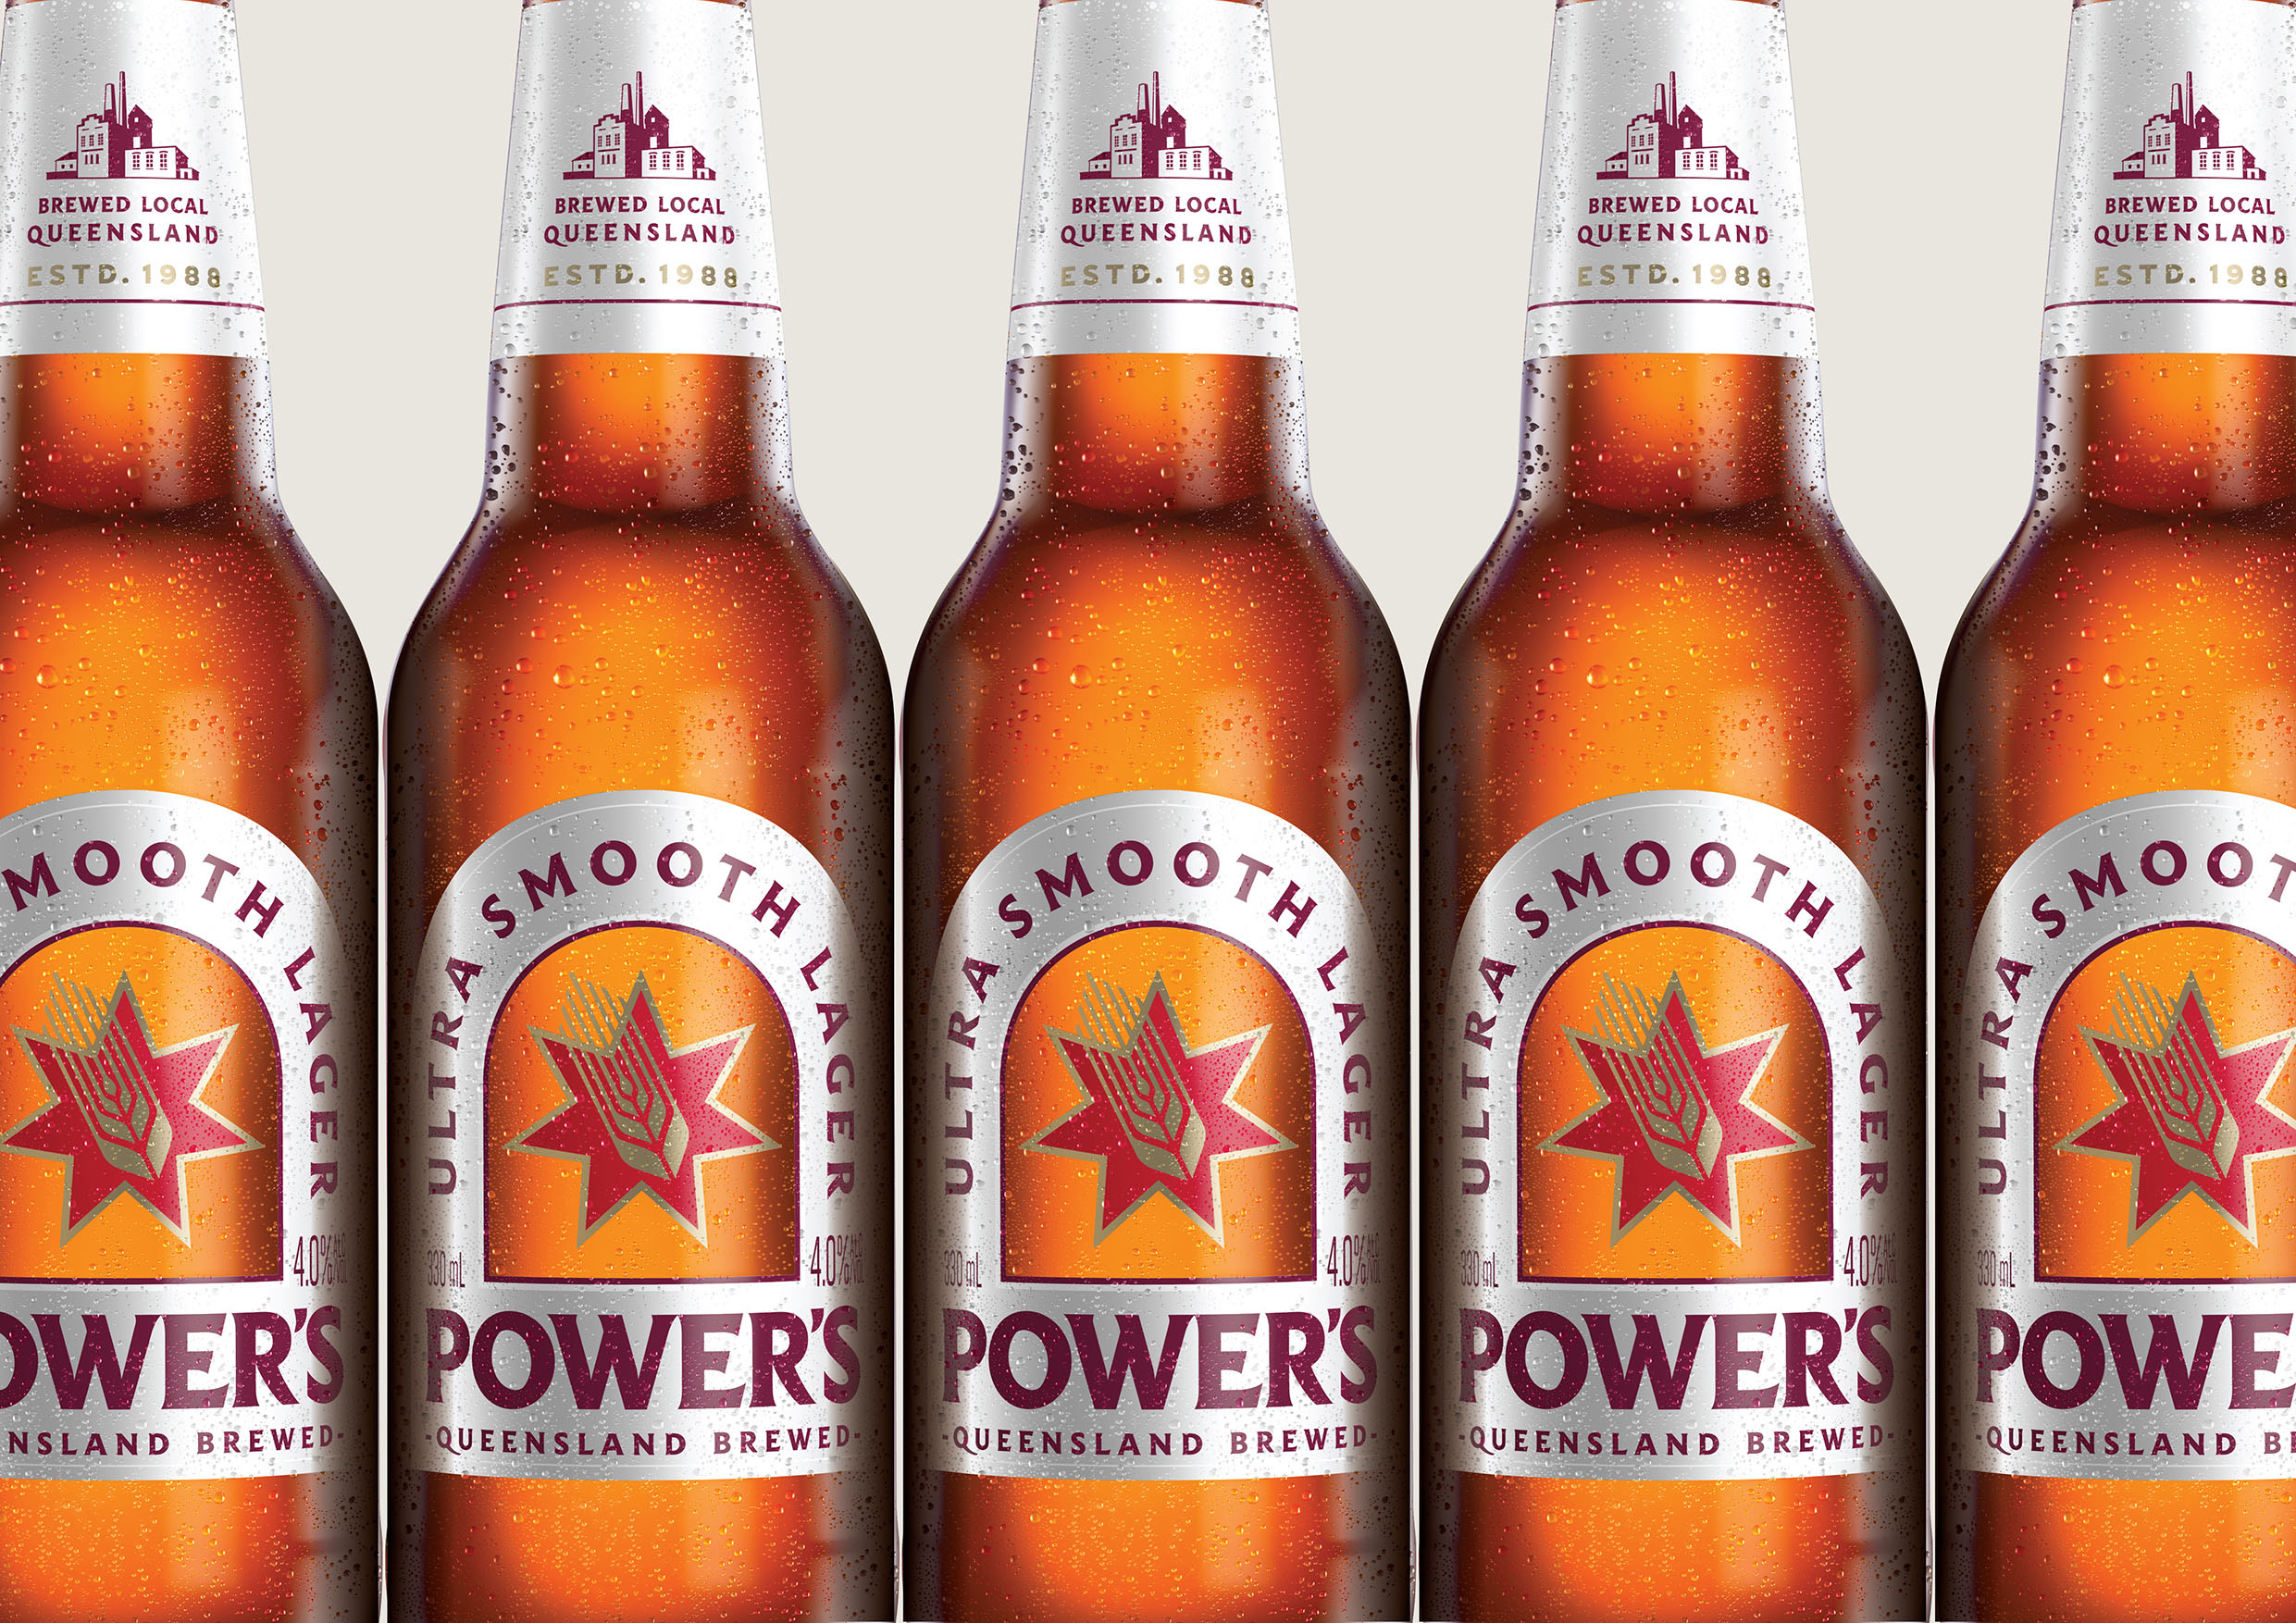 Power Lager – Bringing Back Queenslands Iconic Beer From the 80’s